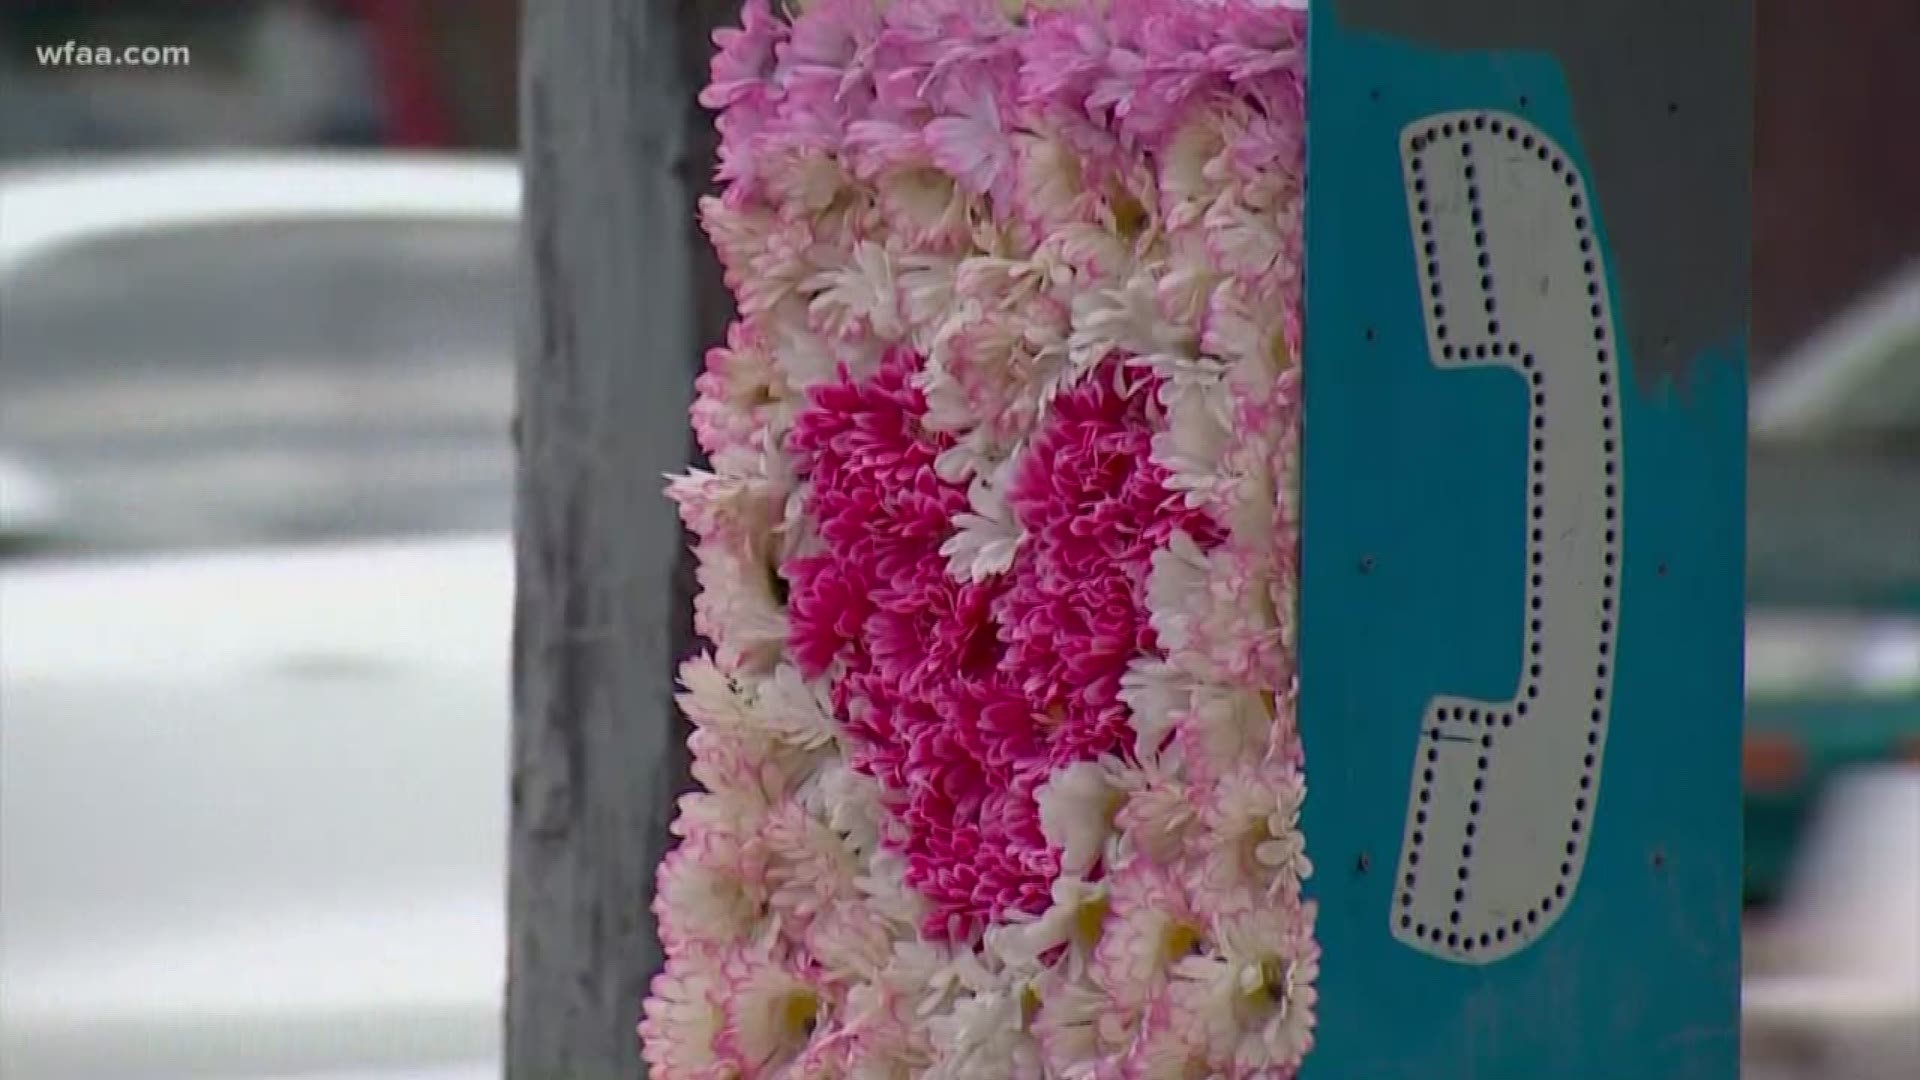 Payphones around the Lakewood area have received a mystery makeover. 